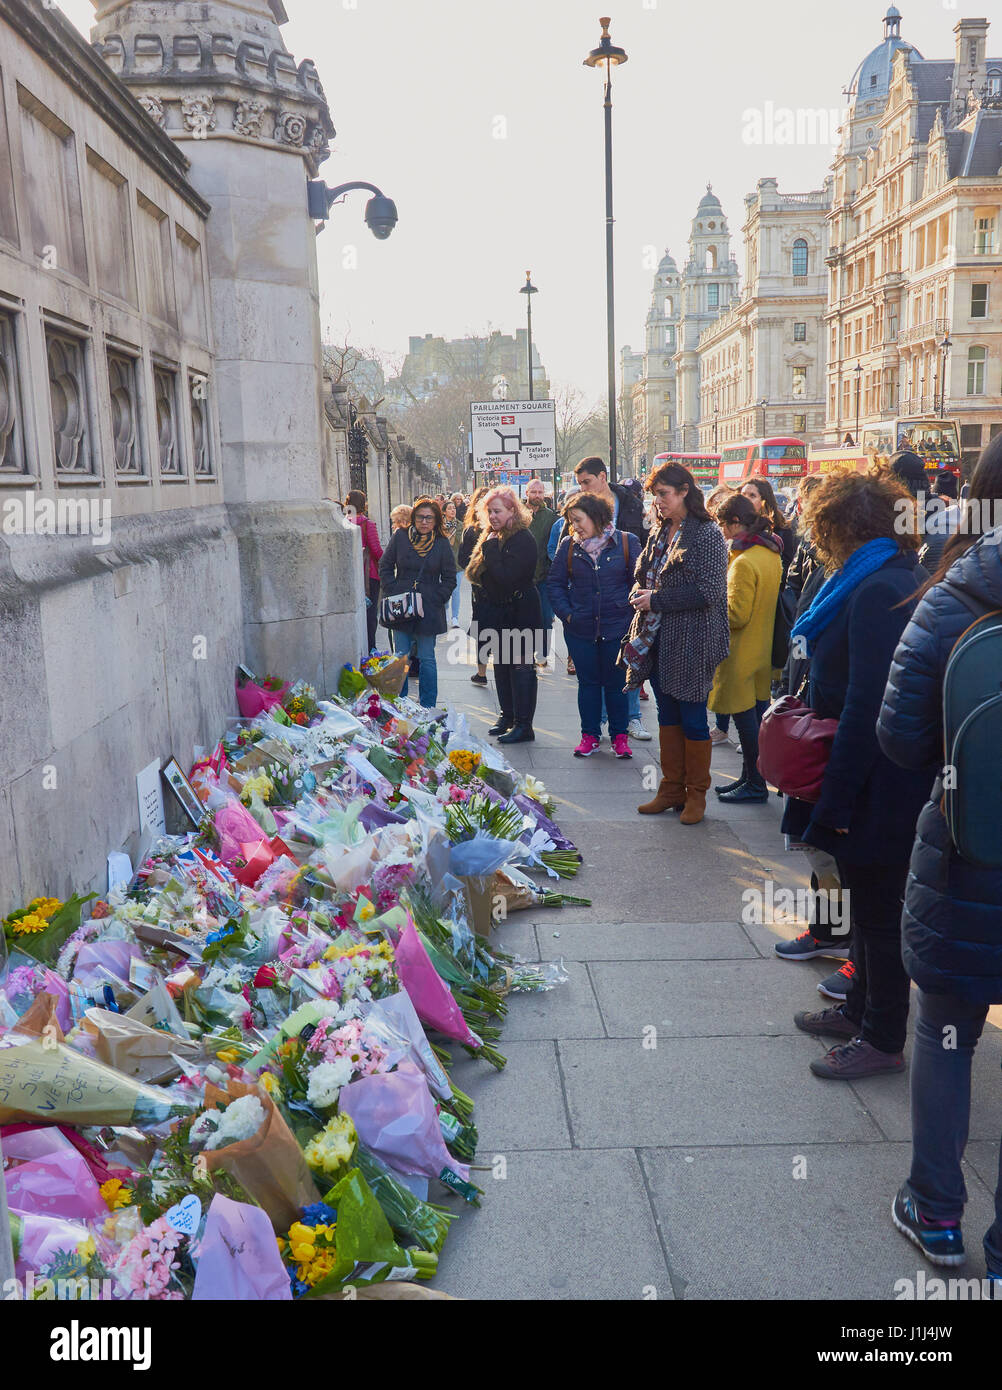 Tourists and Londoners looking at Floral tributes to victims of the Westminster terrorist attack, Westminster Bridge, London, England Stock Photo